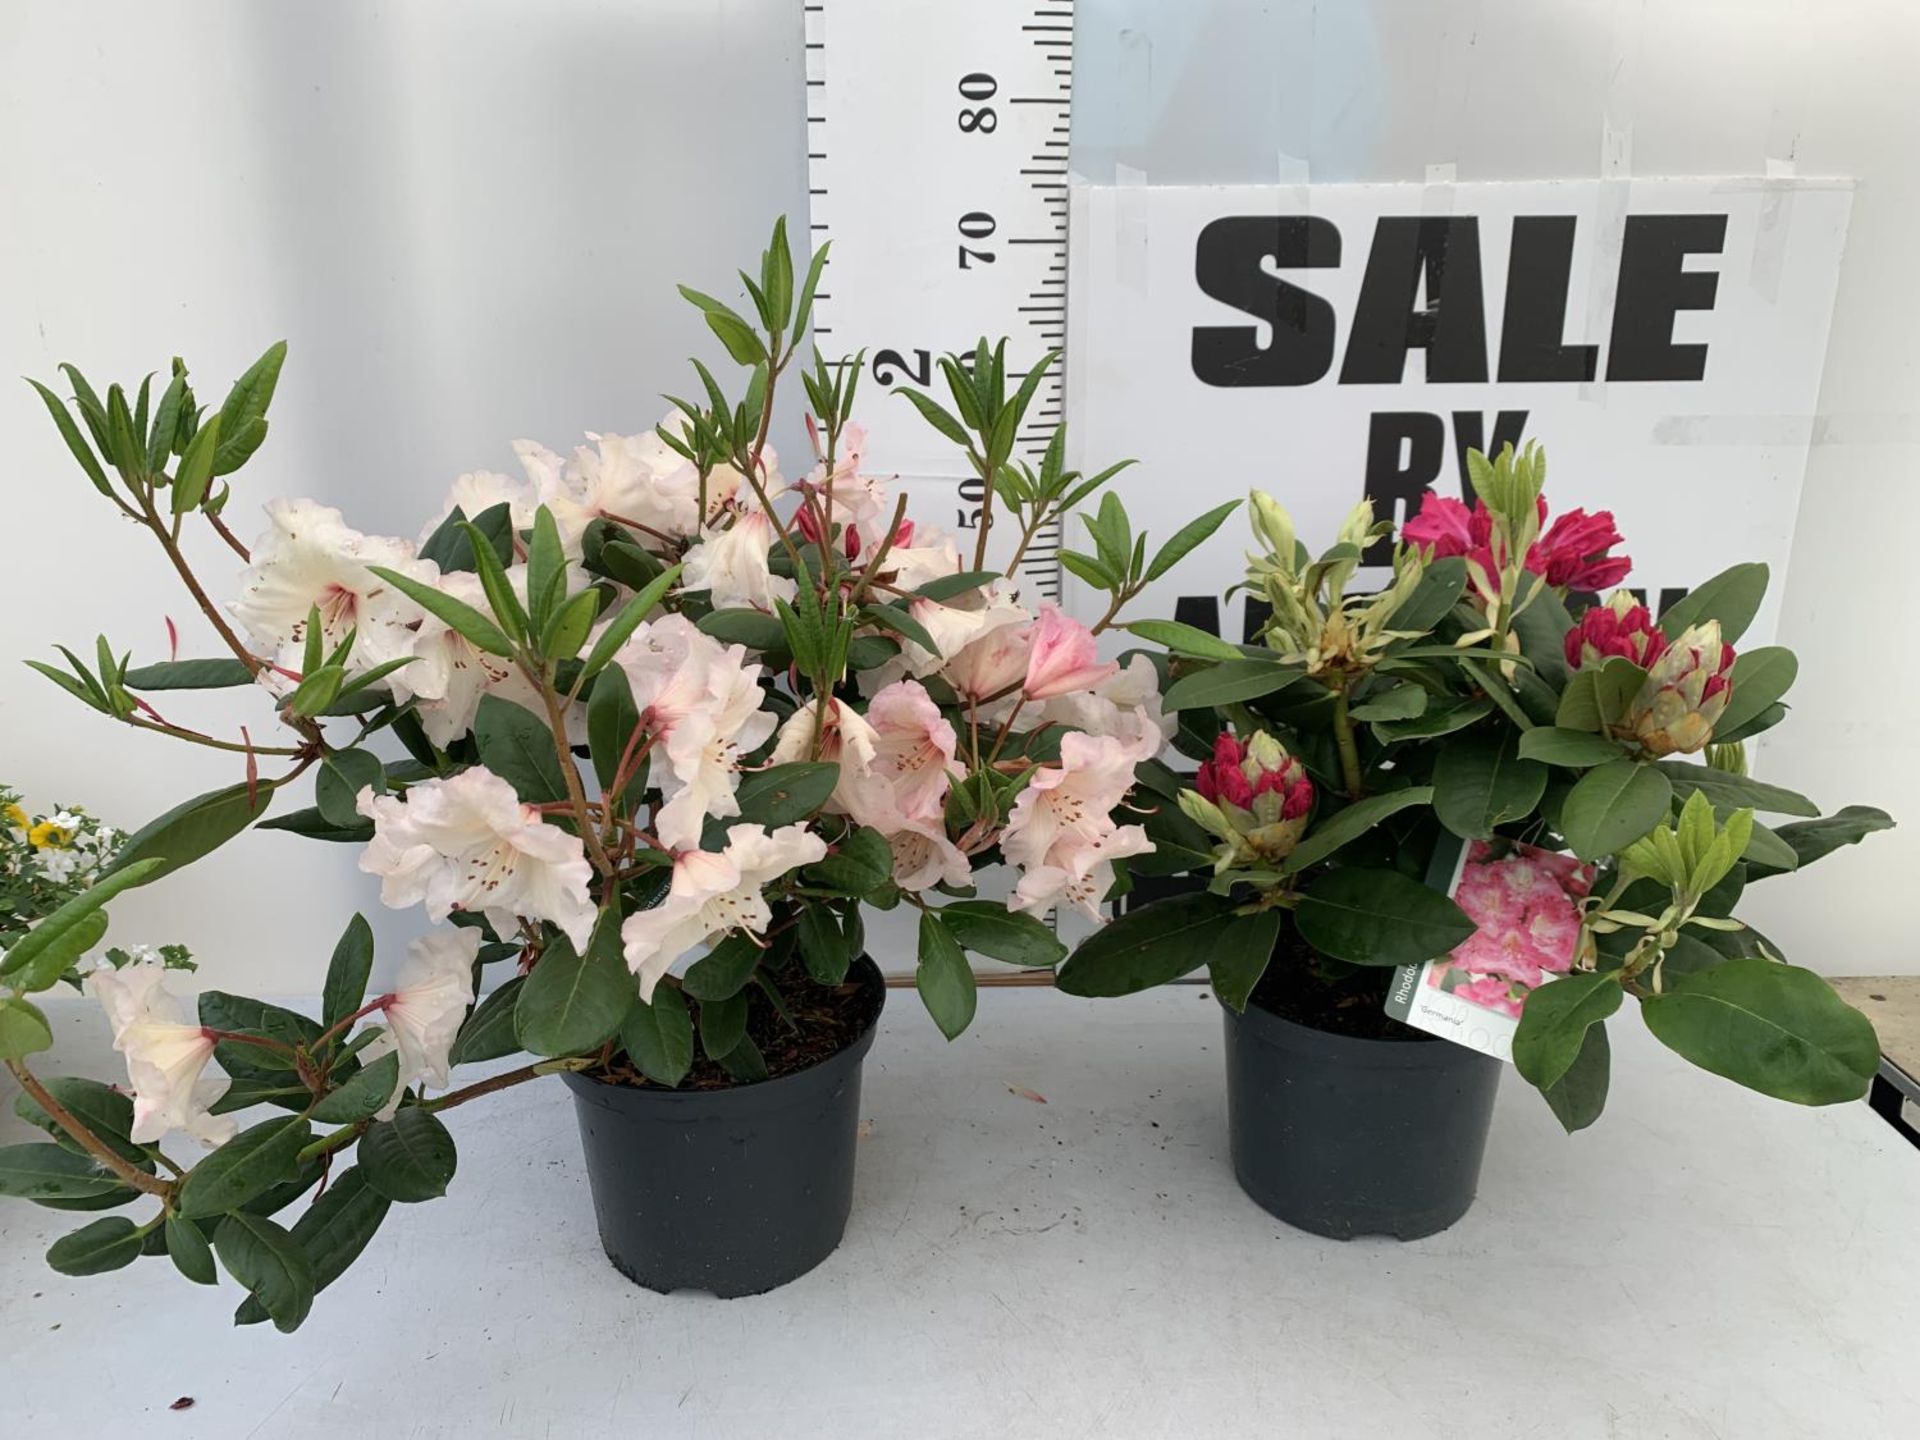 TWO RHODODENDRON GERMANIA DARK PINK AND VIRGINIA RICHARDS LIGHT PINK IN 5 LTR POTS 60CM TALL PLUS